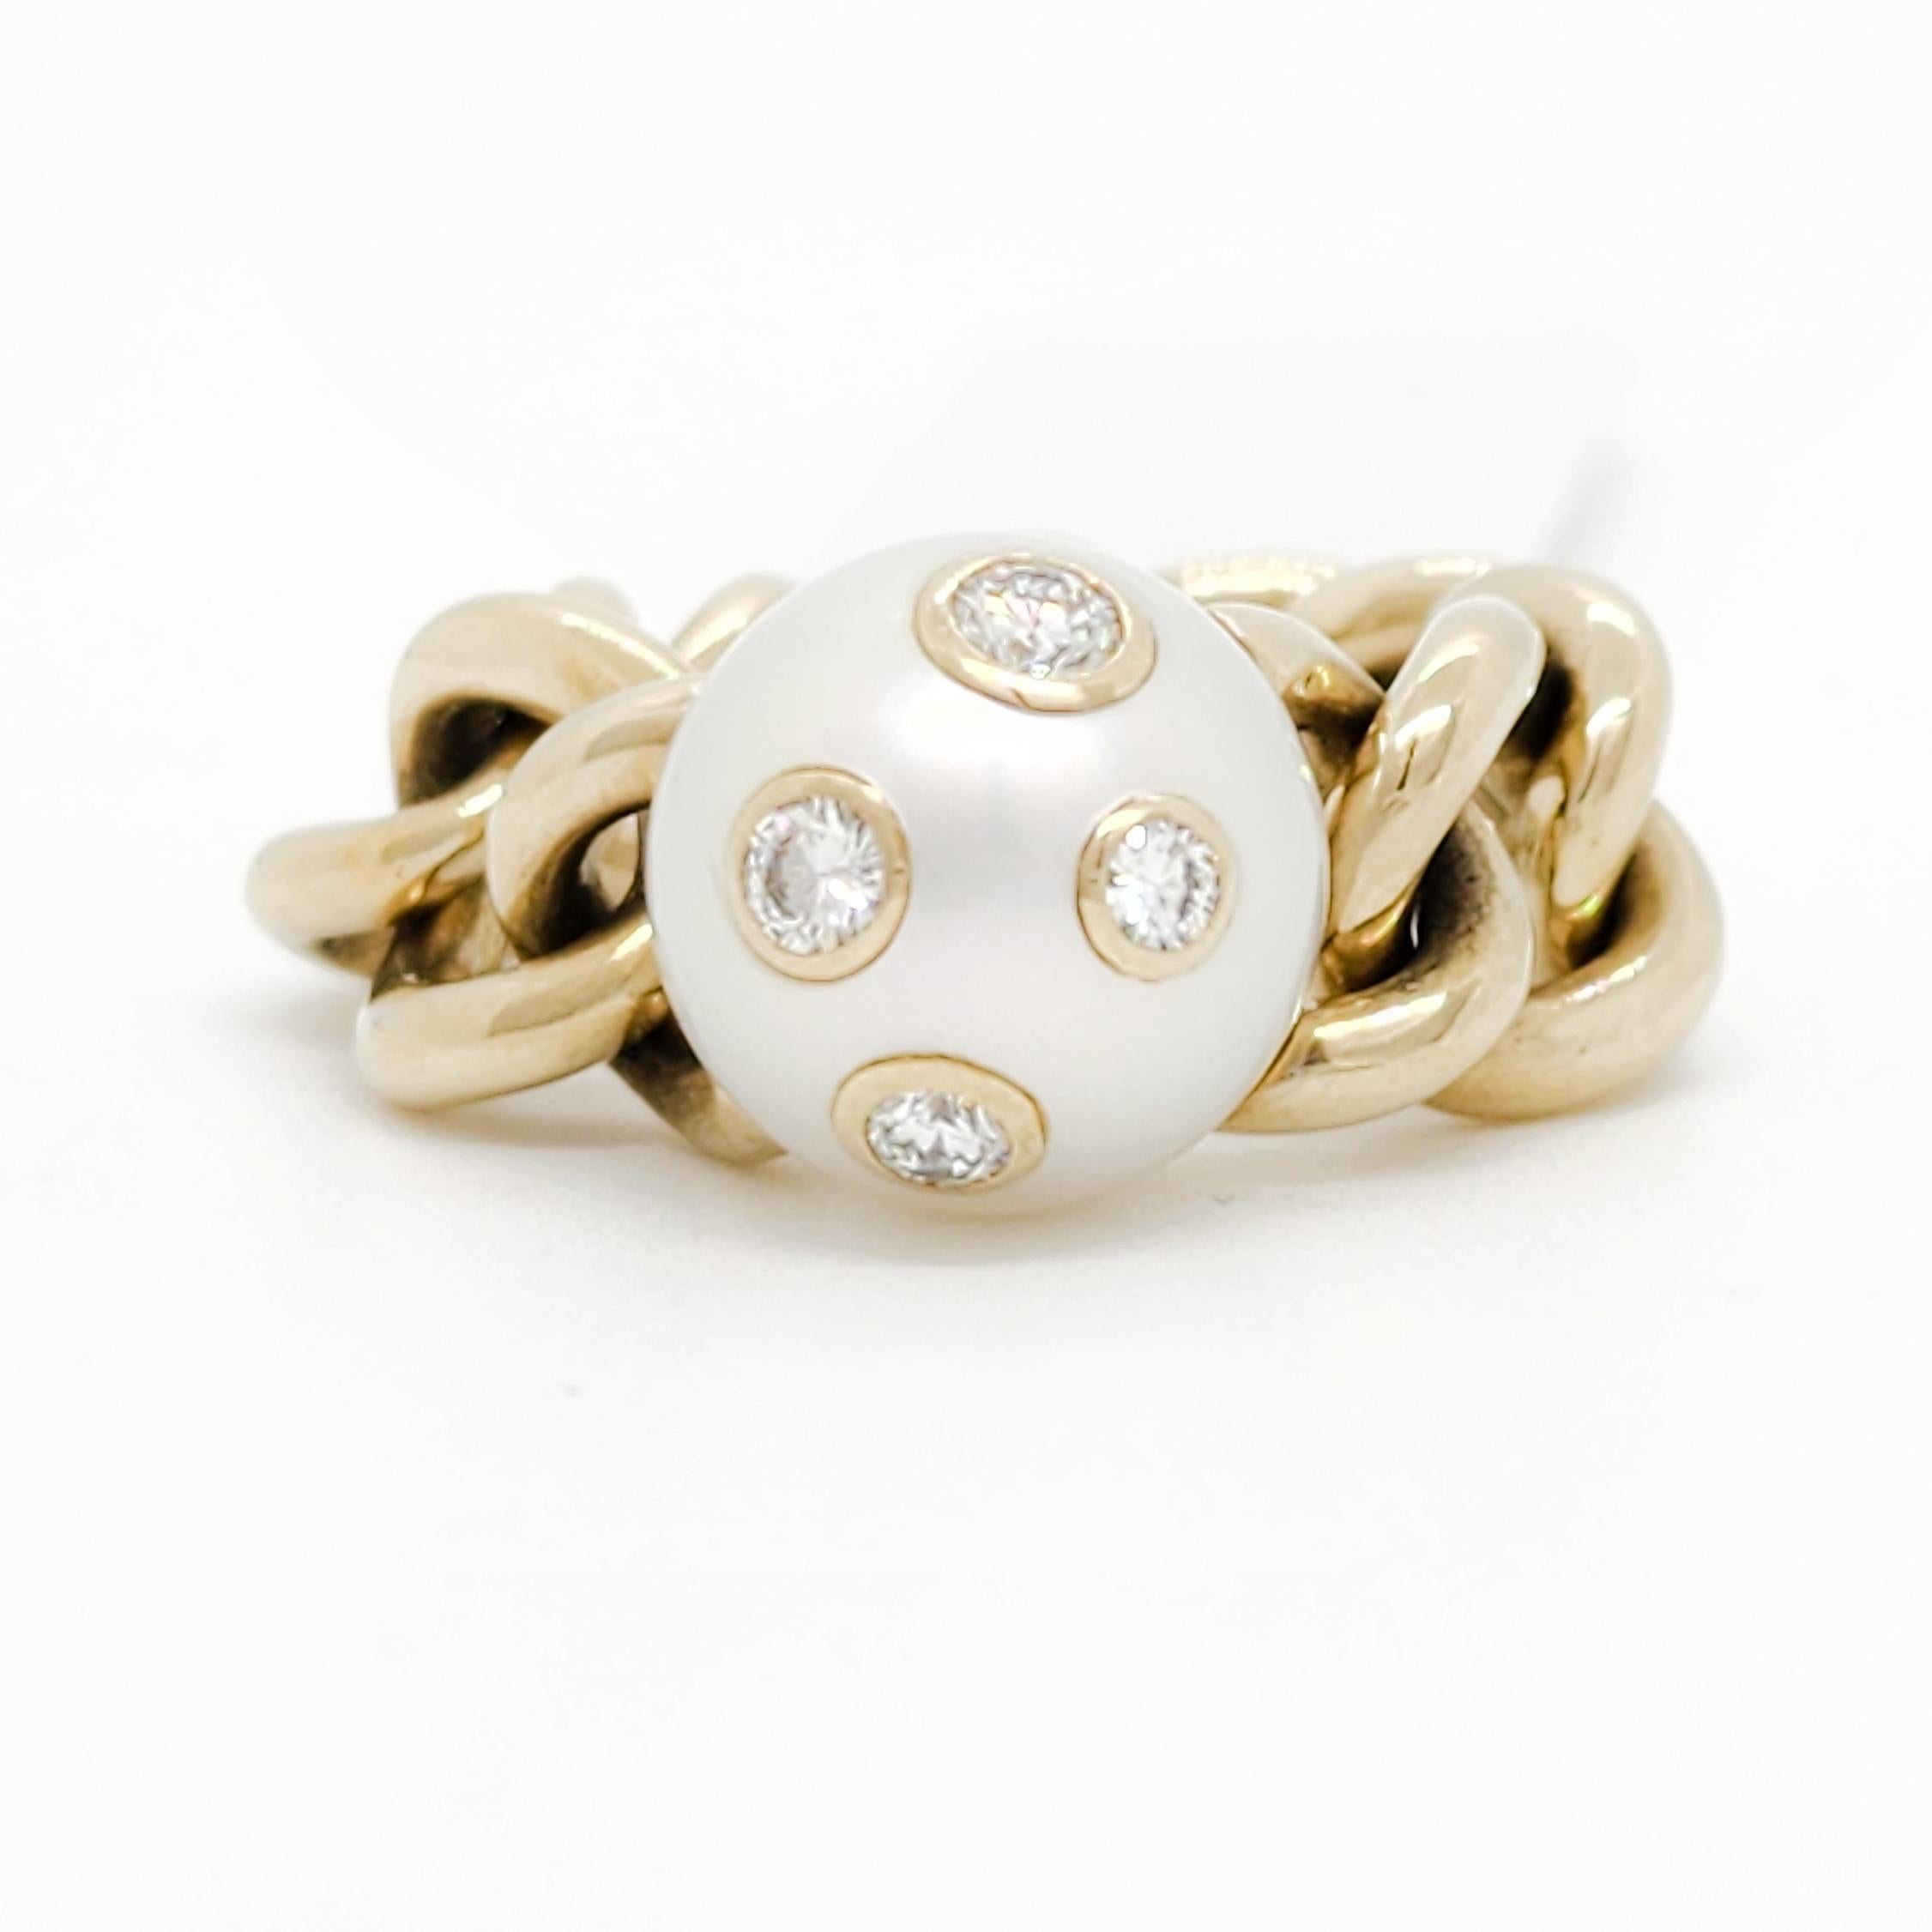 Round Cut Mikimoto Estate White Pearl and Diamond Chain Link Ring in 18k Yellow Gold